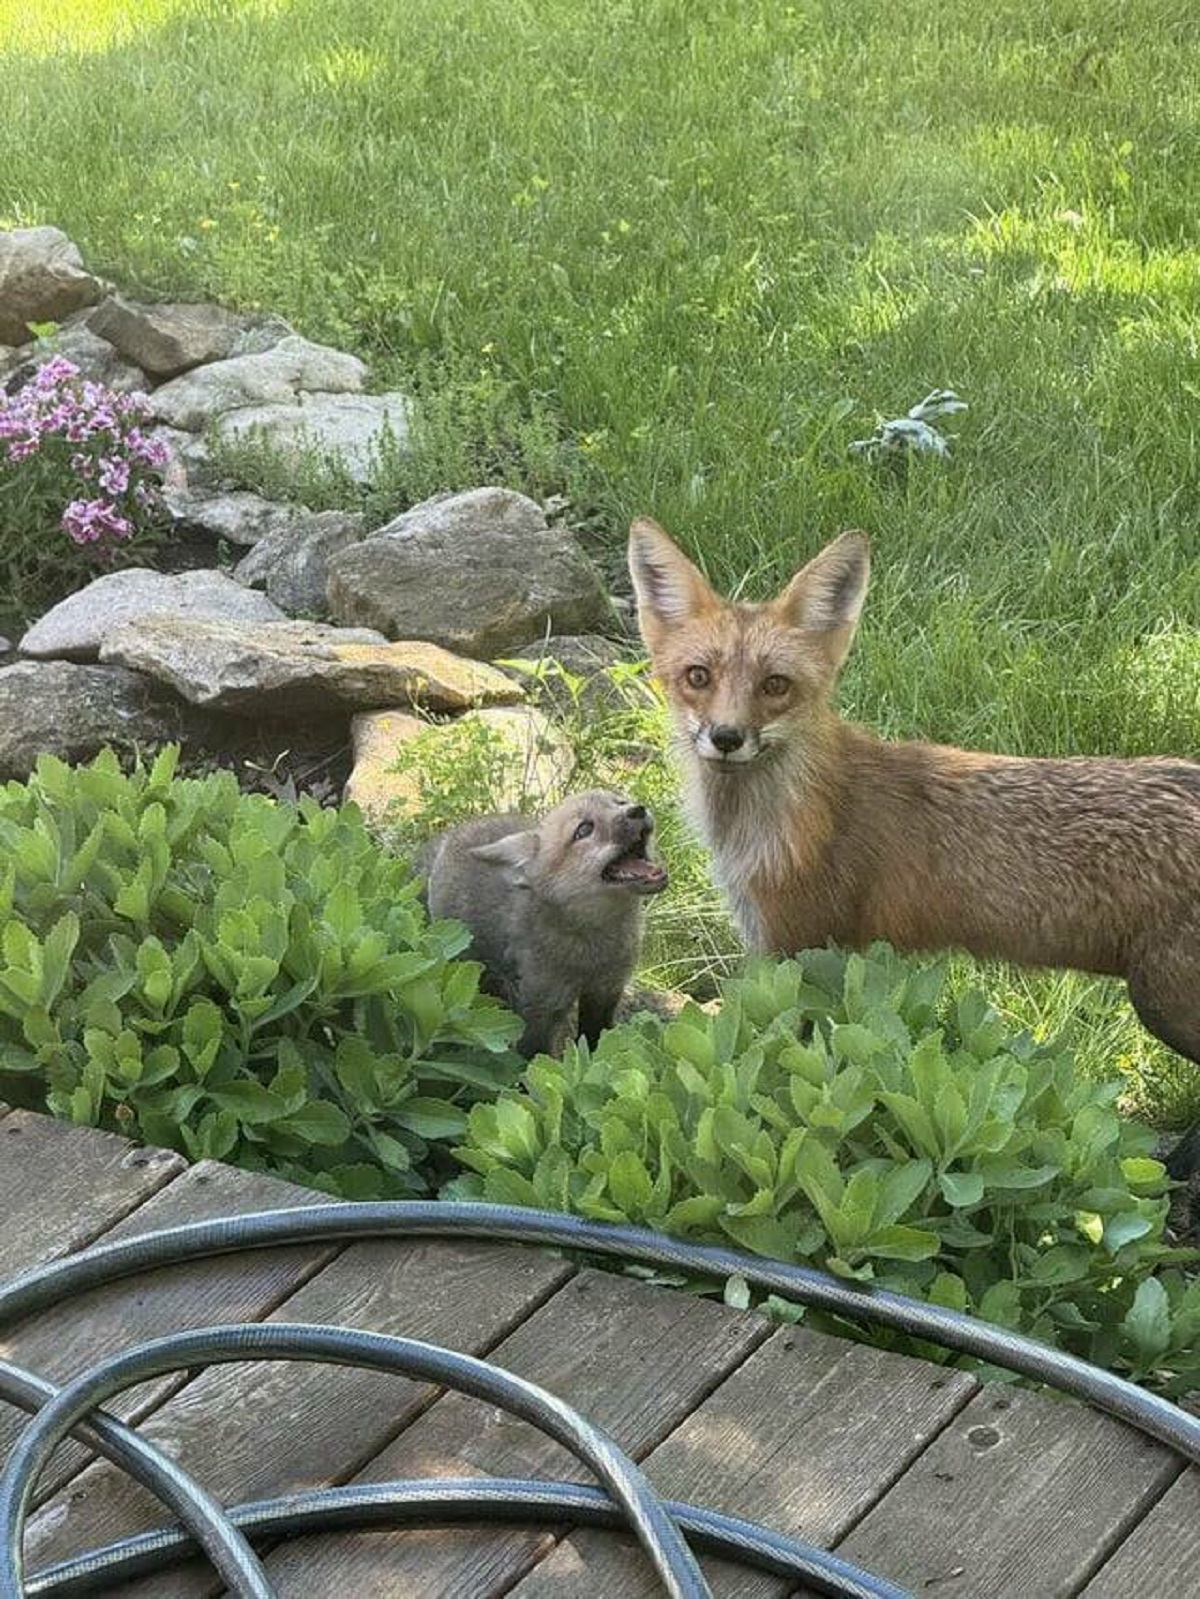 "Neighborhood fox and her kits are living under my front deck rn"